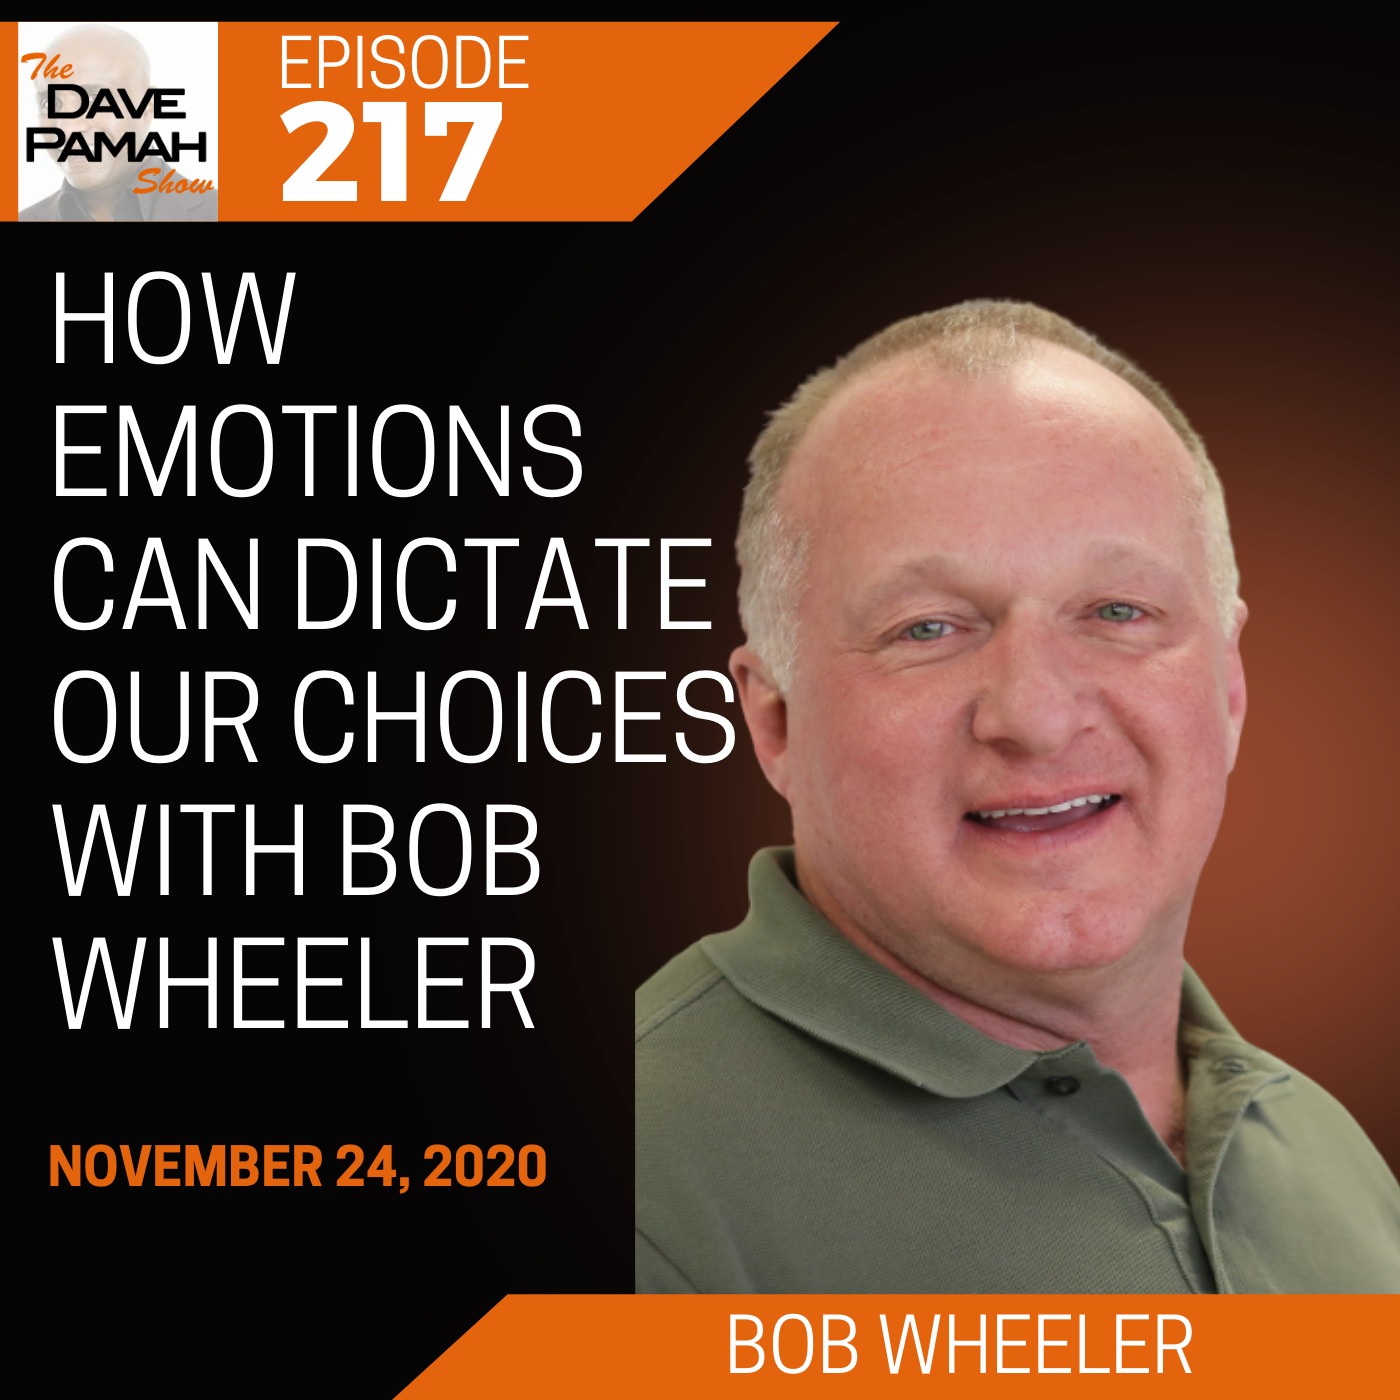 How emotions can dictate our choices with Bob Wheeler Image